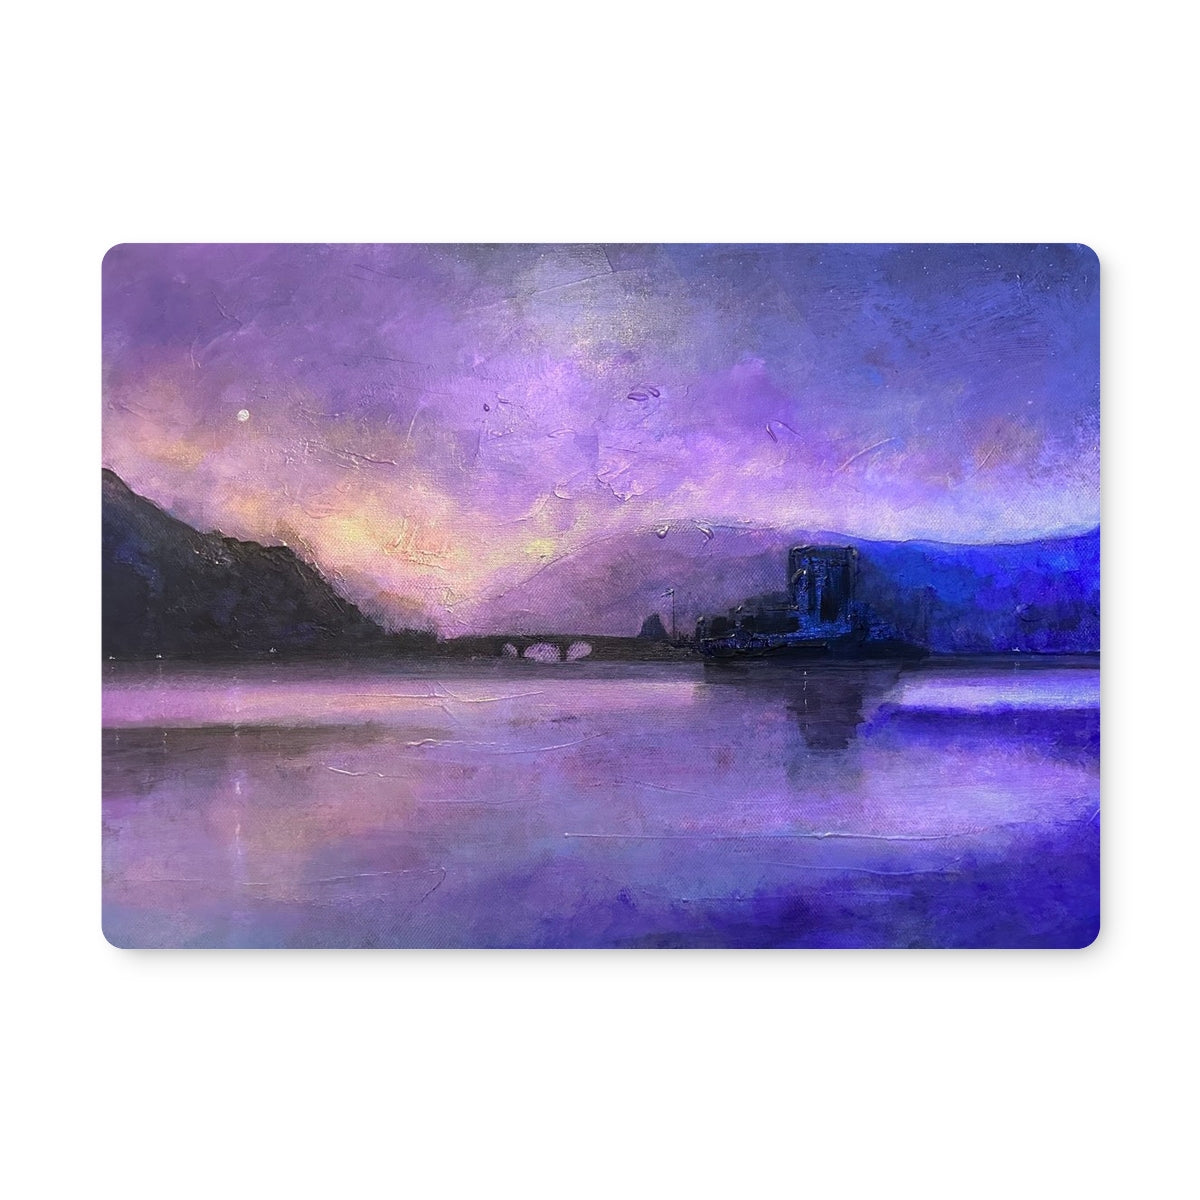 Eilean Donan Castle Moonset Art Gifts Placemat-Placemats-Historic & Iconic Scotland Art Gallery-Single Placemat-Paintings, Prints, Homeware, Art Gifts From Scotland By Scottish Artist Kevin Hunter